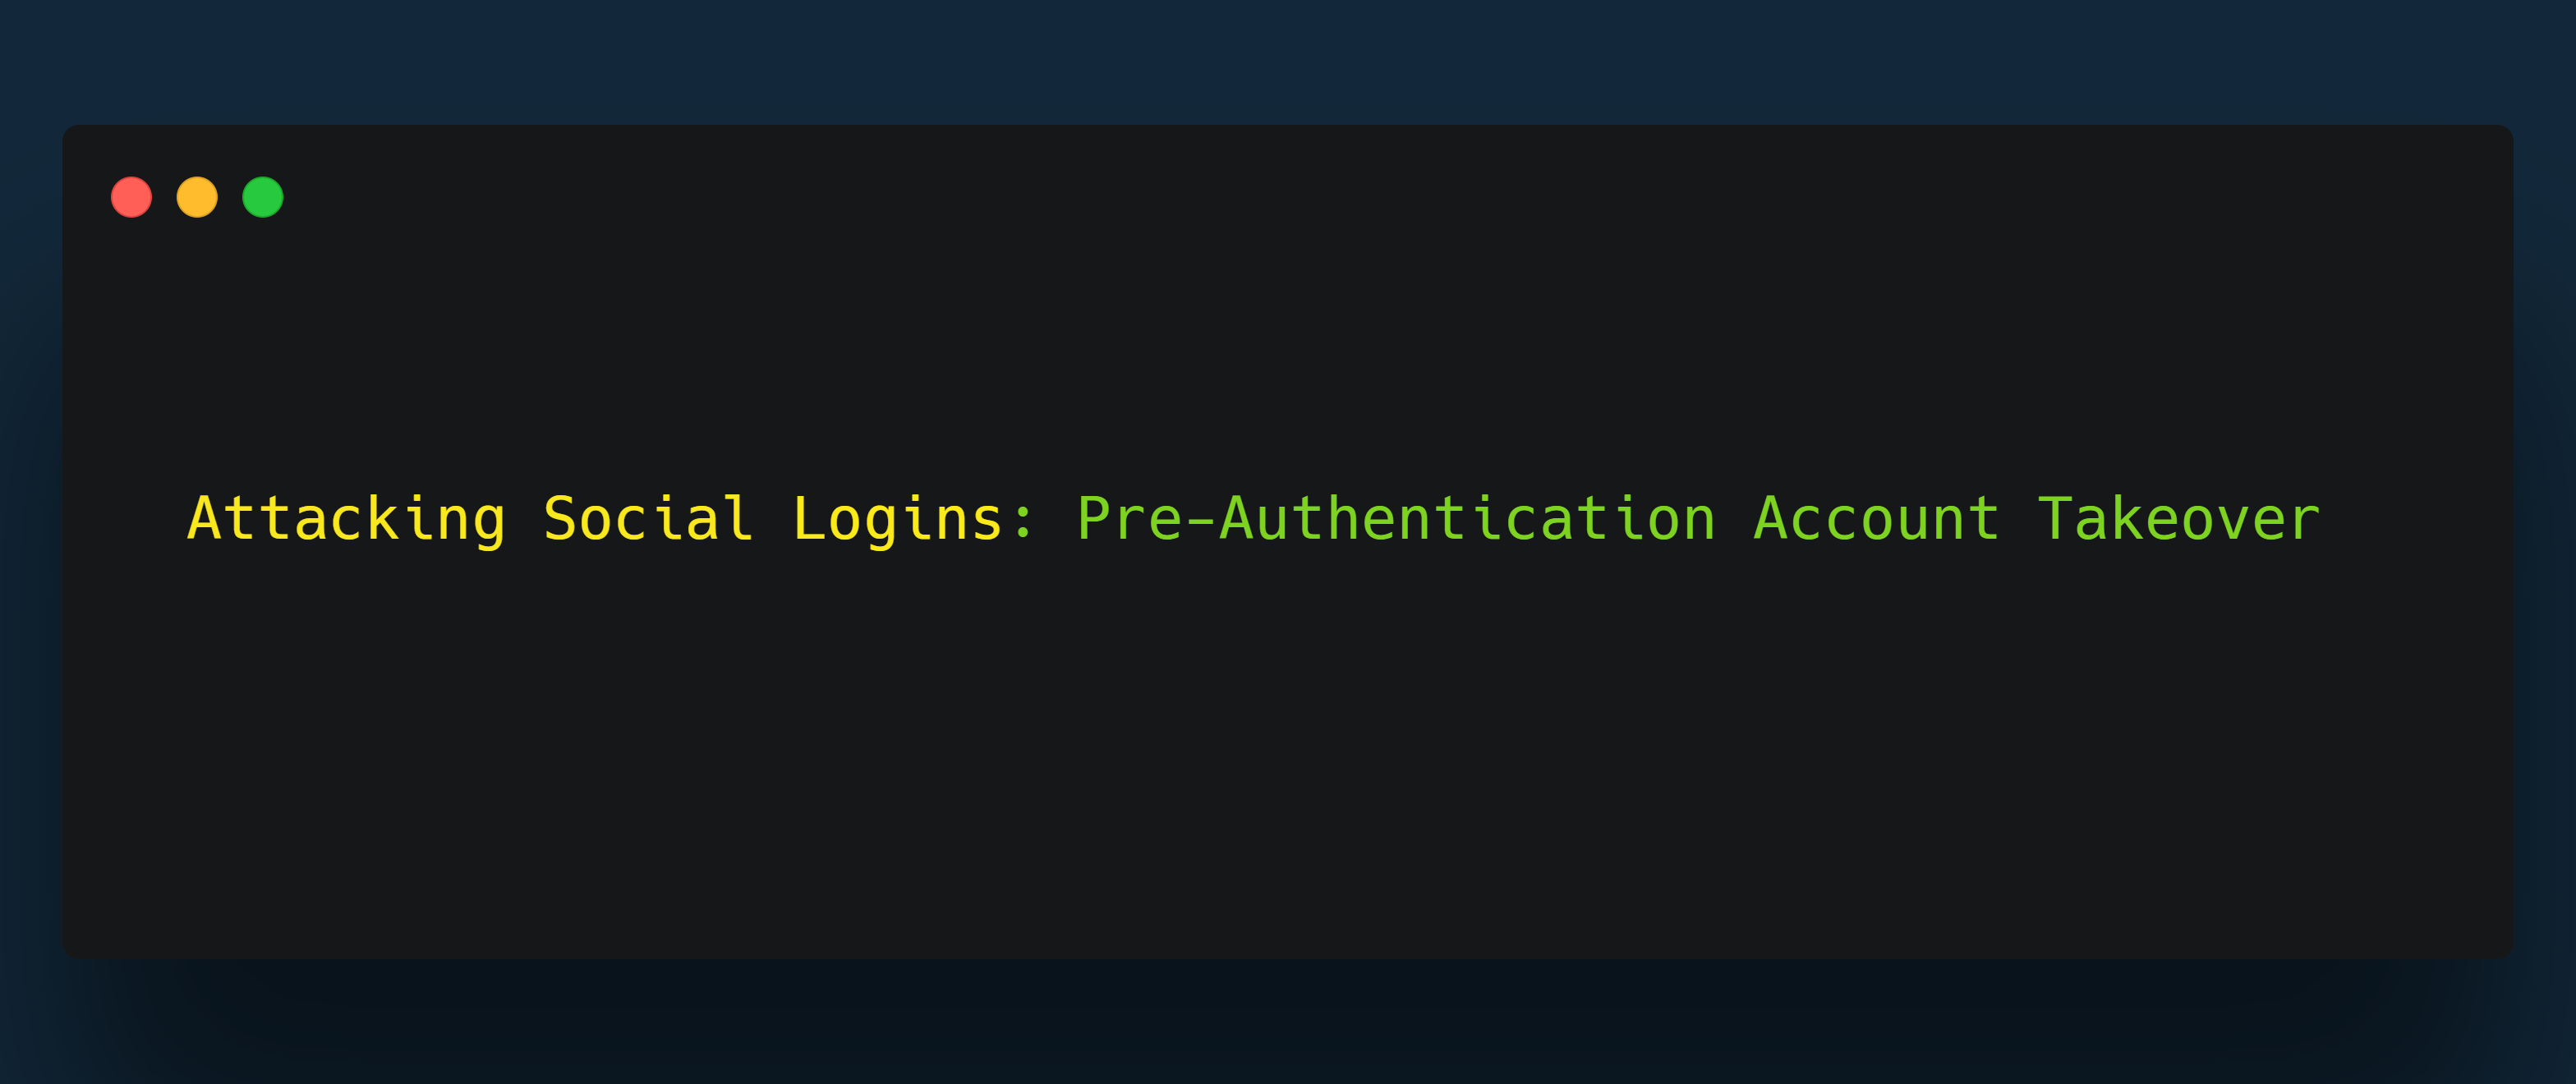 Abusing Social Logins: Pre-Authentication Account Takeover